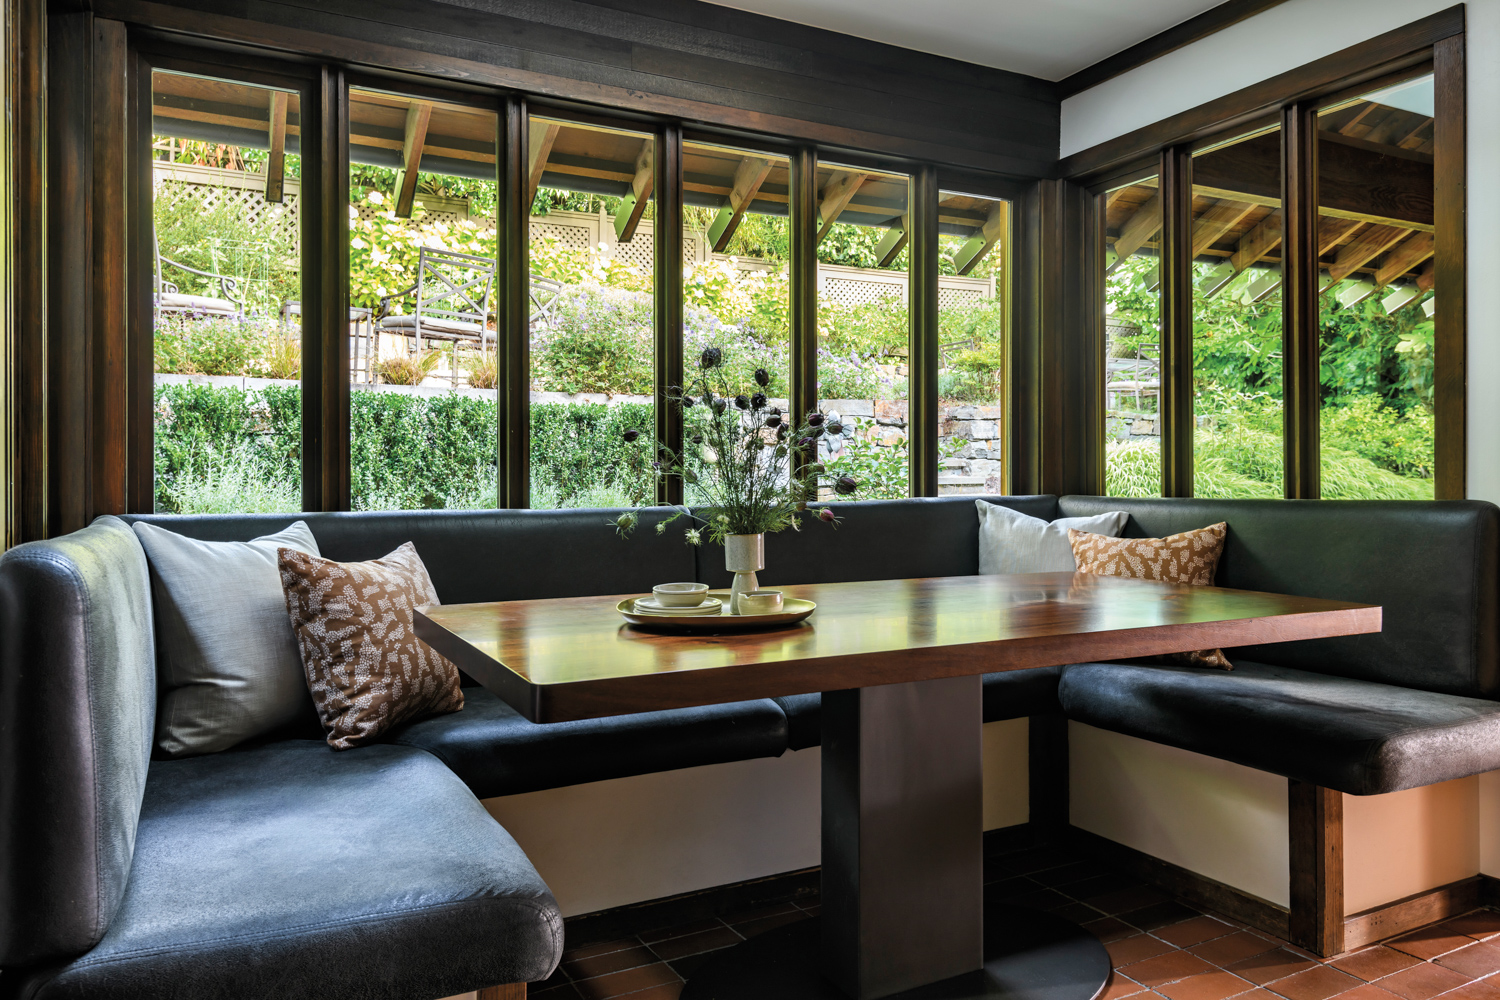 banquette seating beside a window